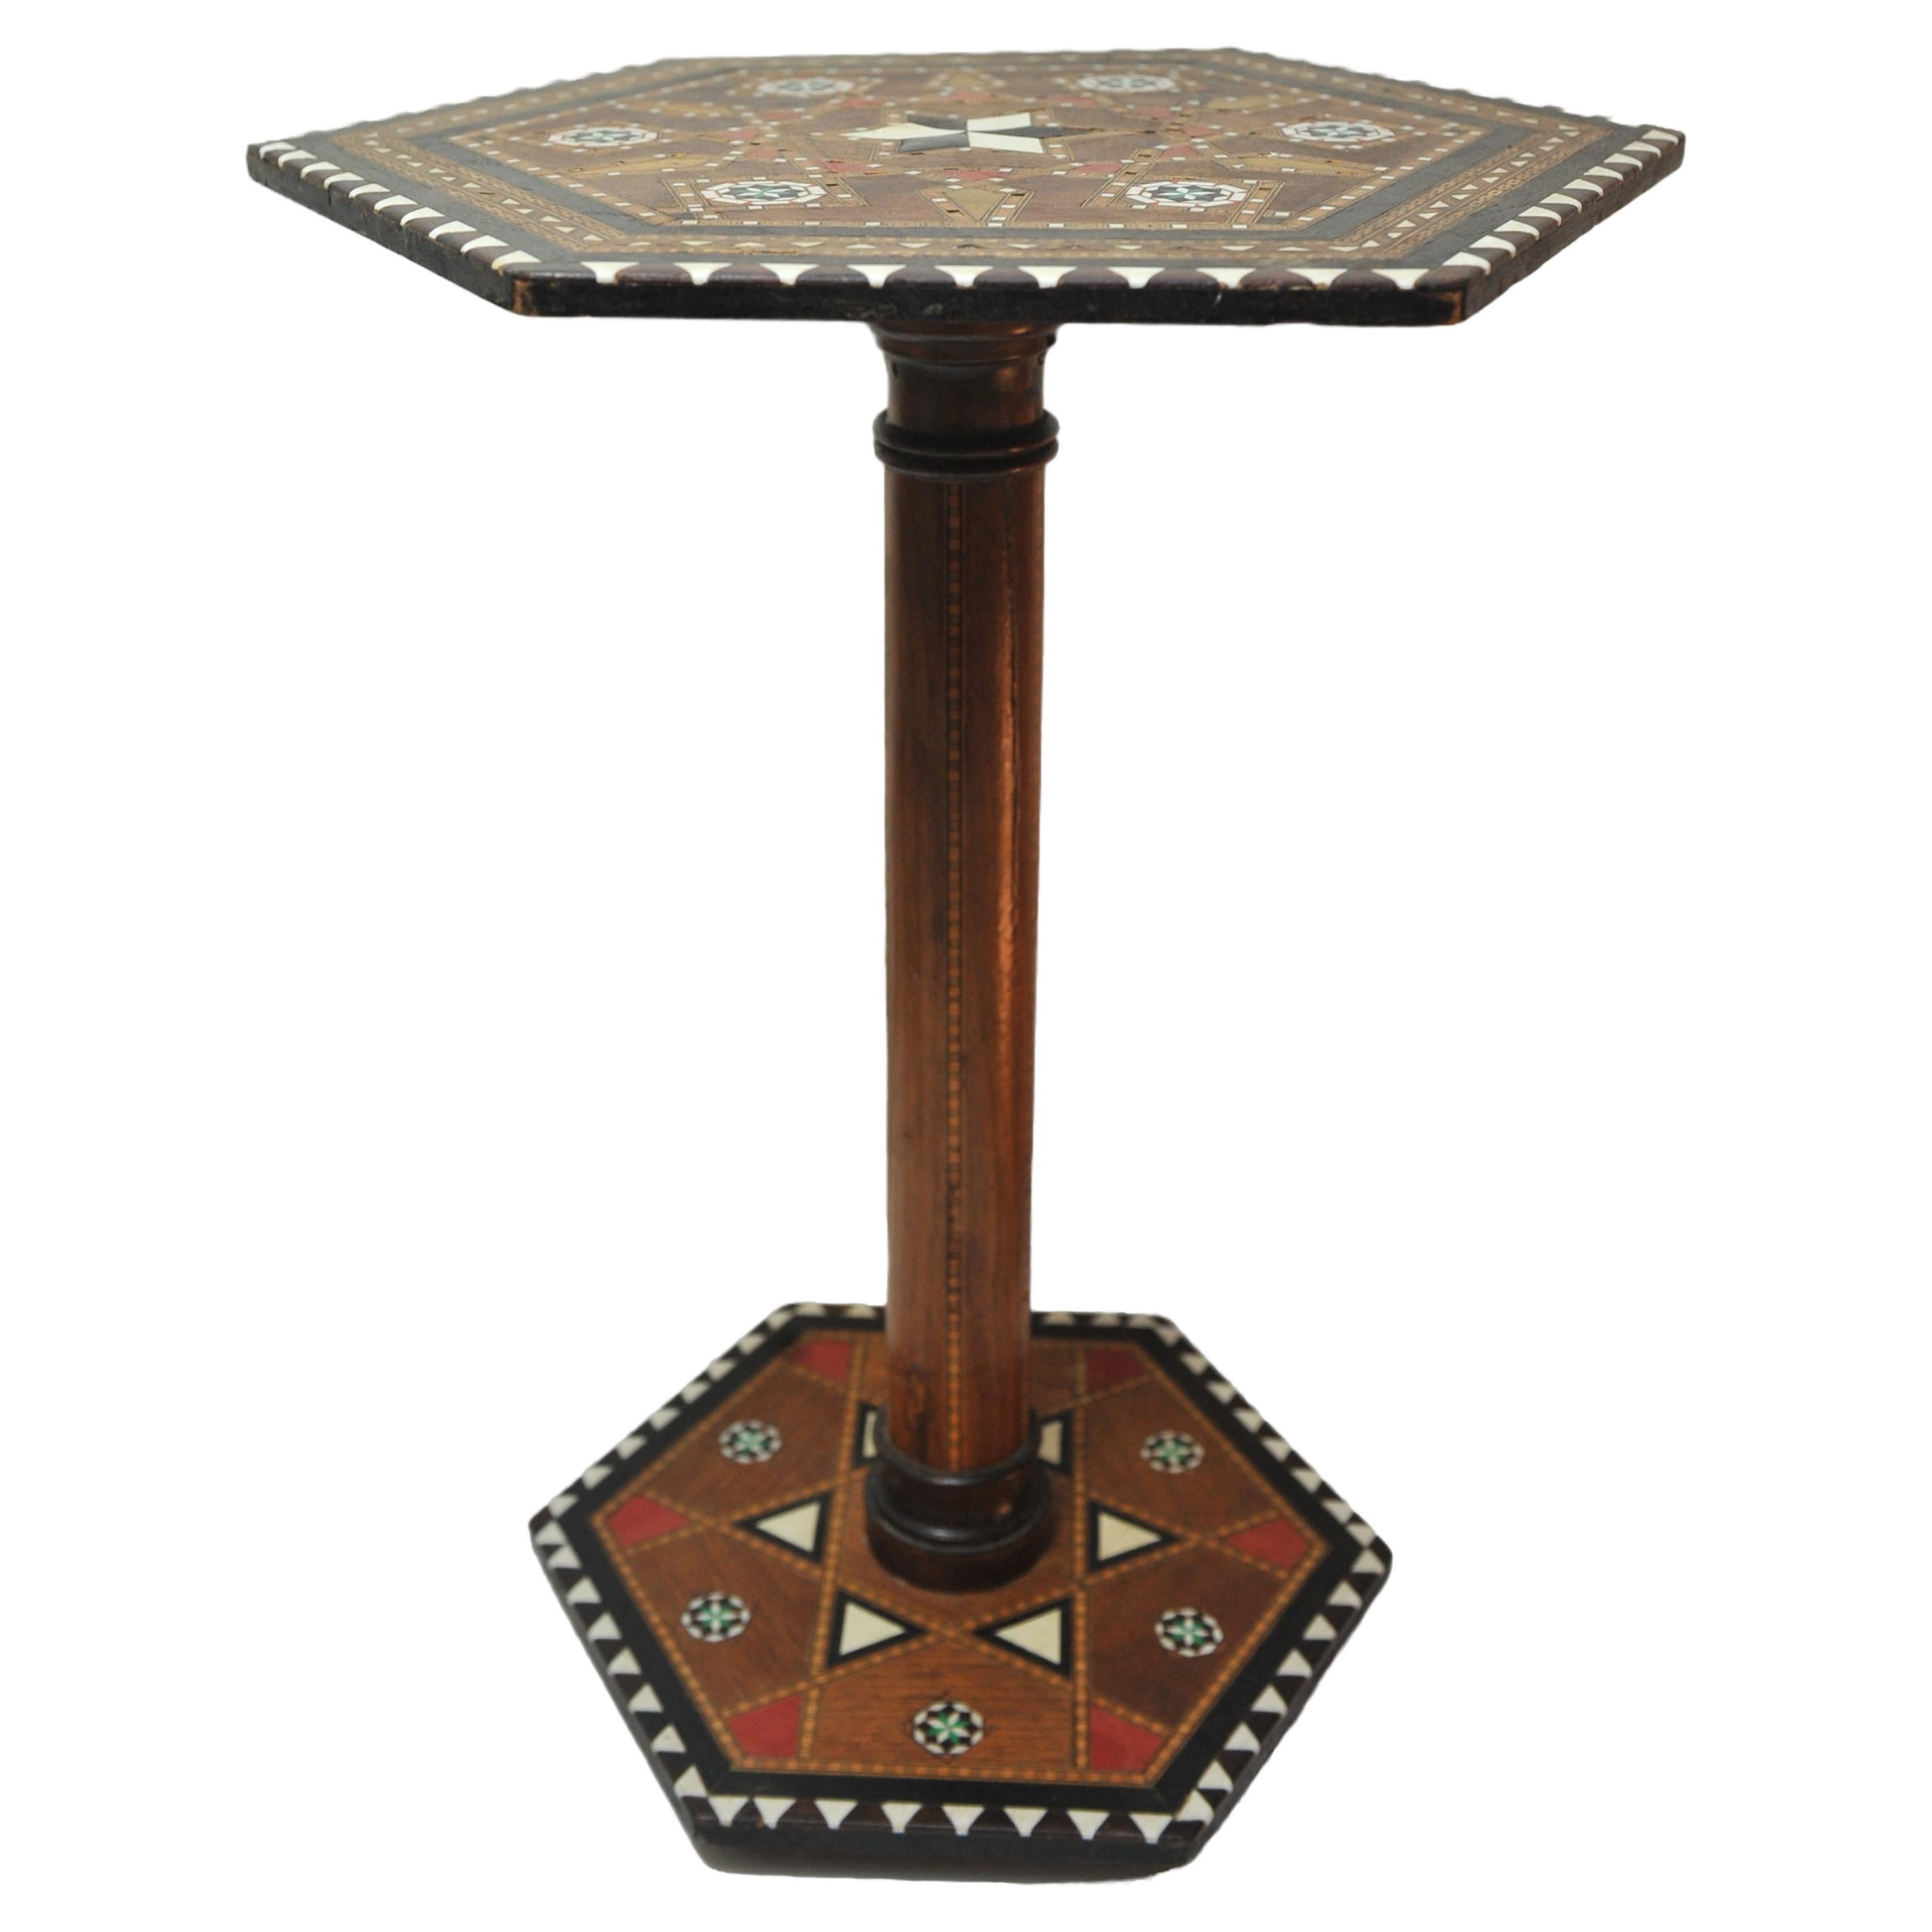 A 19th Century Hexagonal Damascene Fruitwood Tea Table With Mosaic Detailing  For Sale 1